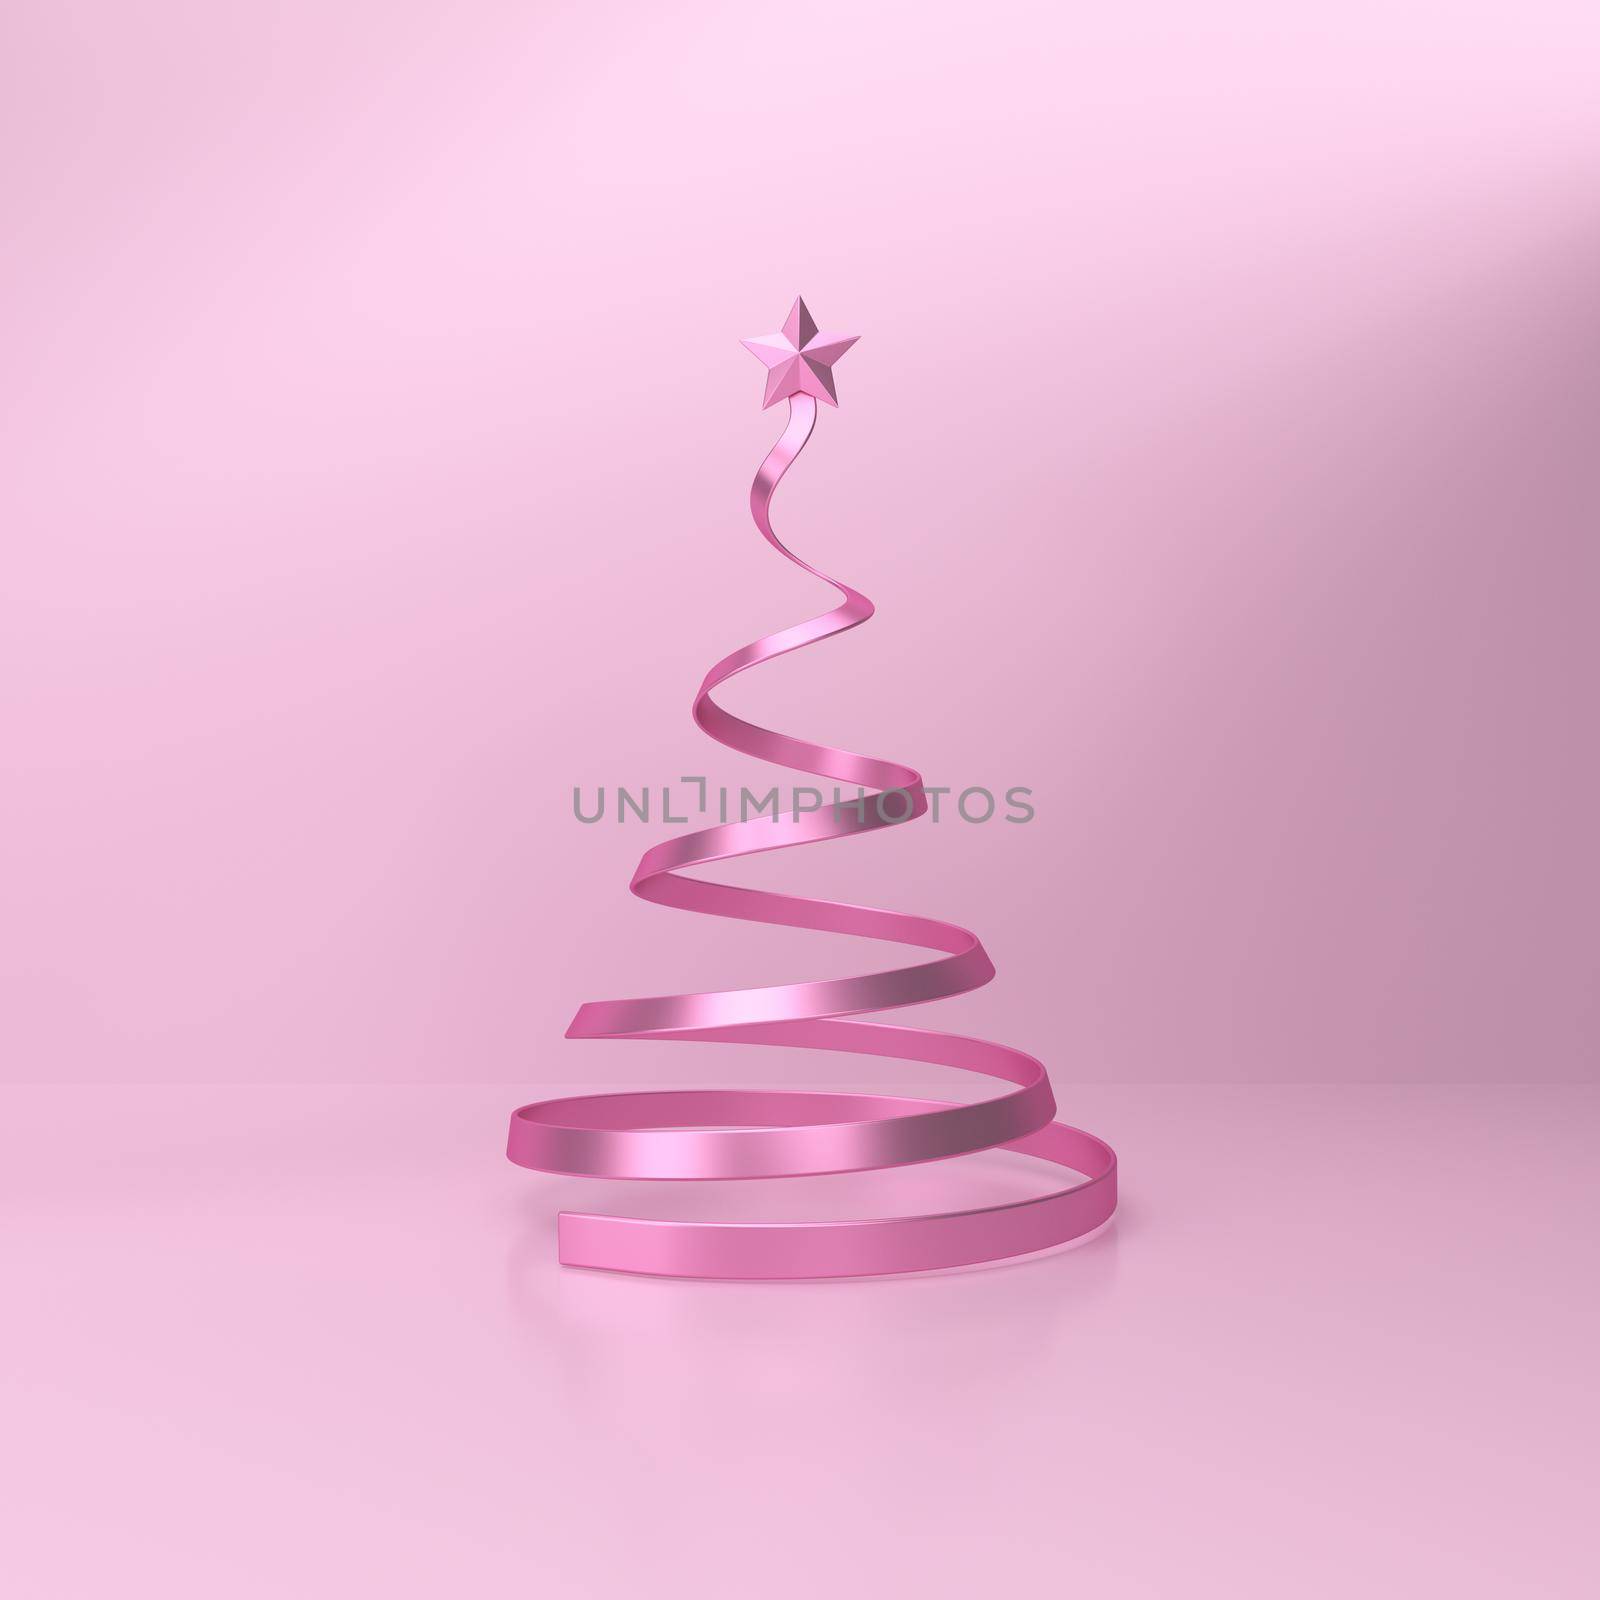 Big star at the top on a christmas tree in studio background in pink. by ImagesRouges